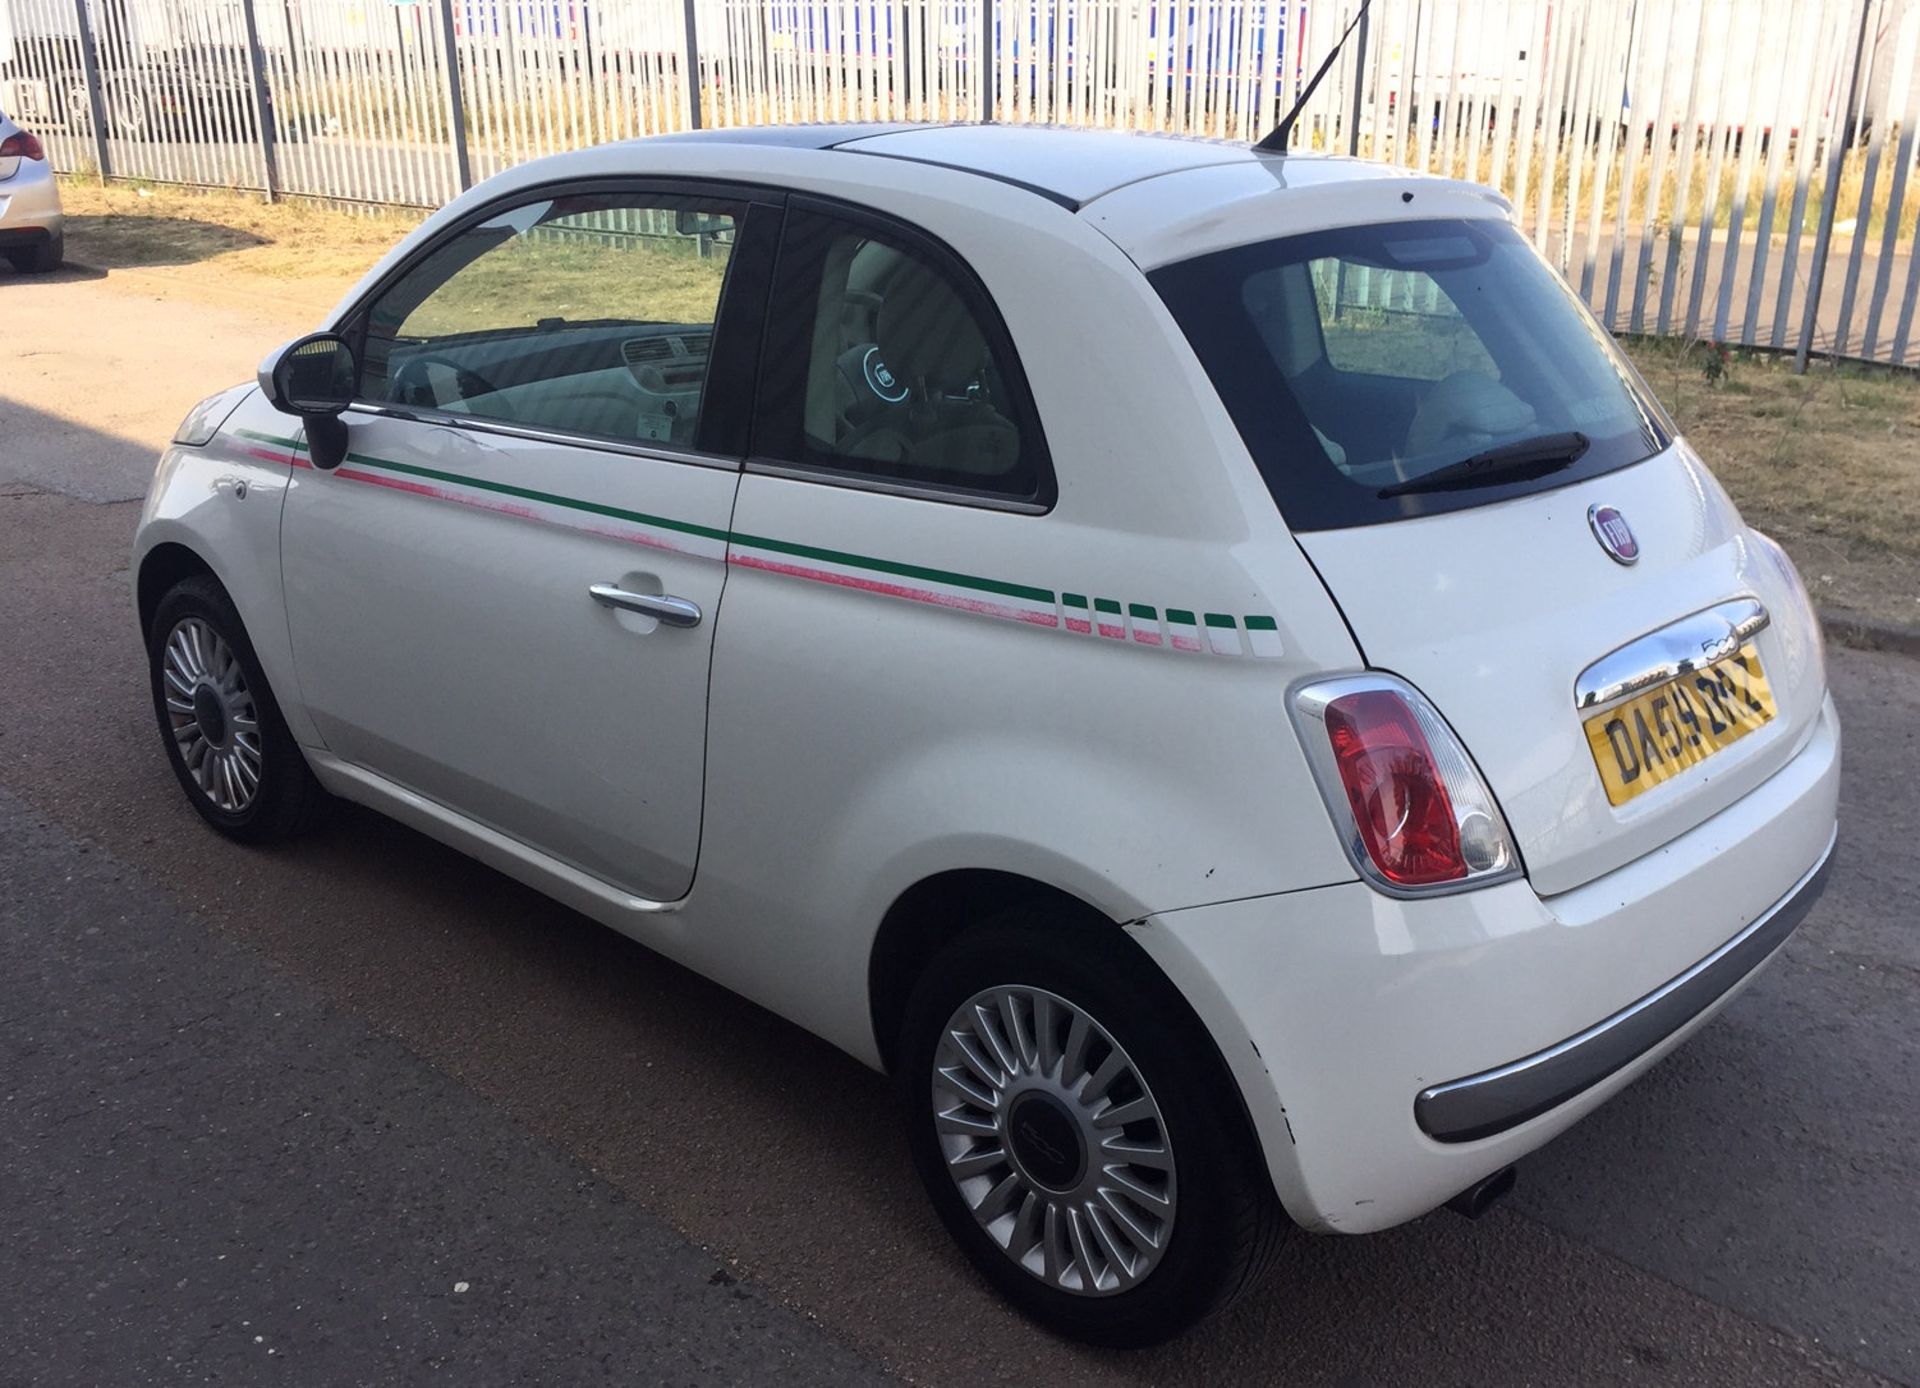 2009 Fiat 500 1.2 Lounge 3 Dr Hatchback - CL505 - NO VAT ON THE HAMMER - Location: Corby, Northampto - Image 2 of 12